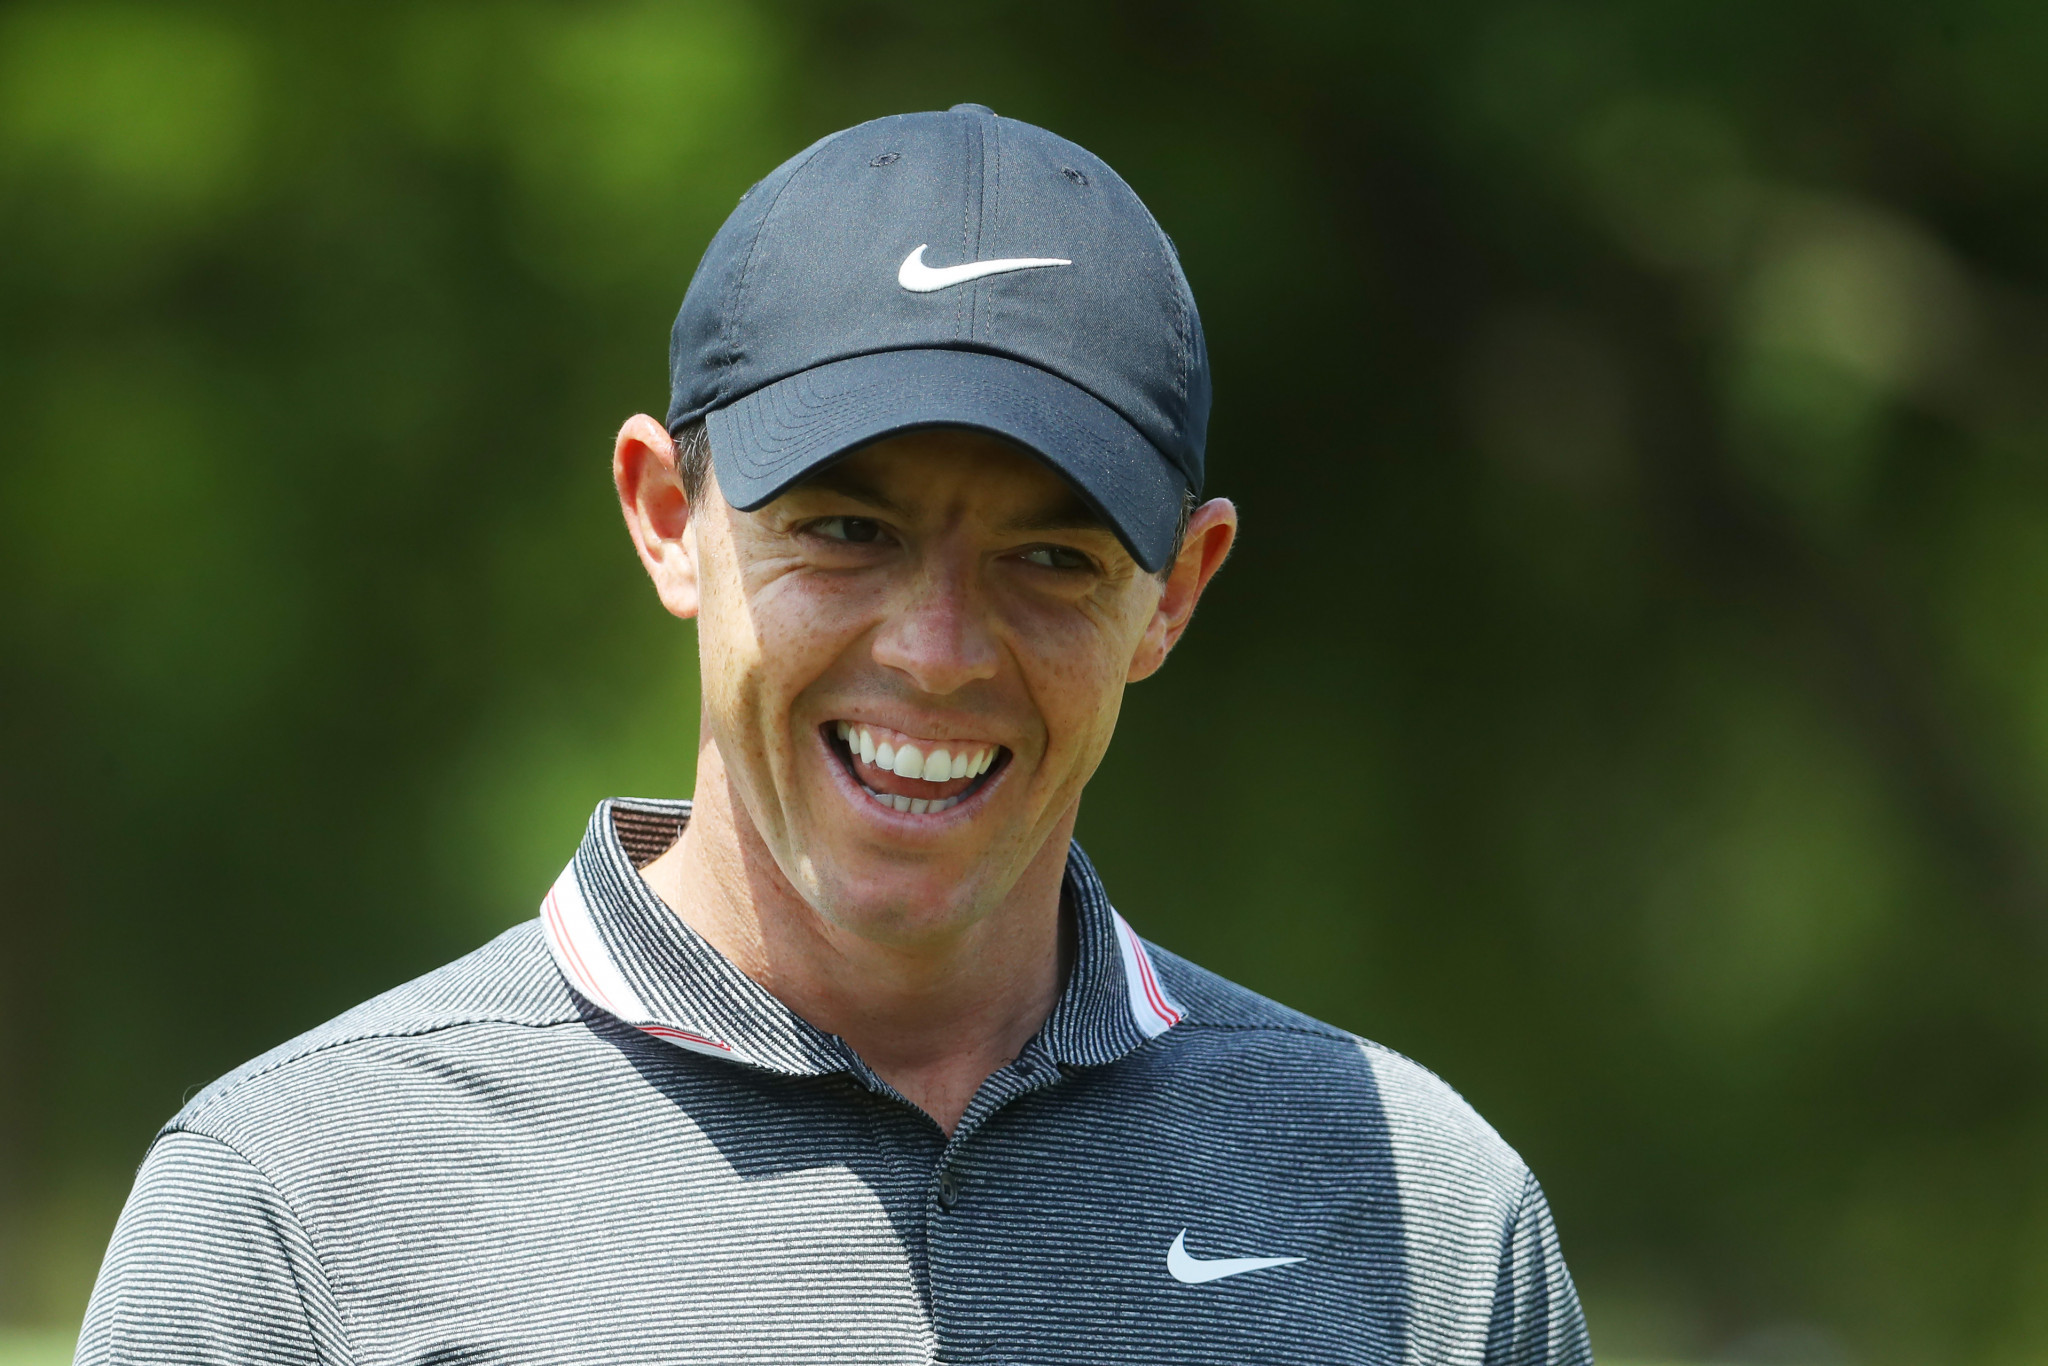 Rory McIlroy made a winning start to the World Golf Championships-Dell Technologies Match Play in Austin ©Getty Images